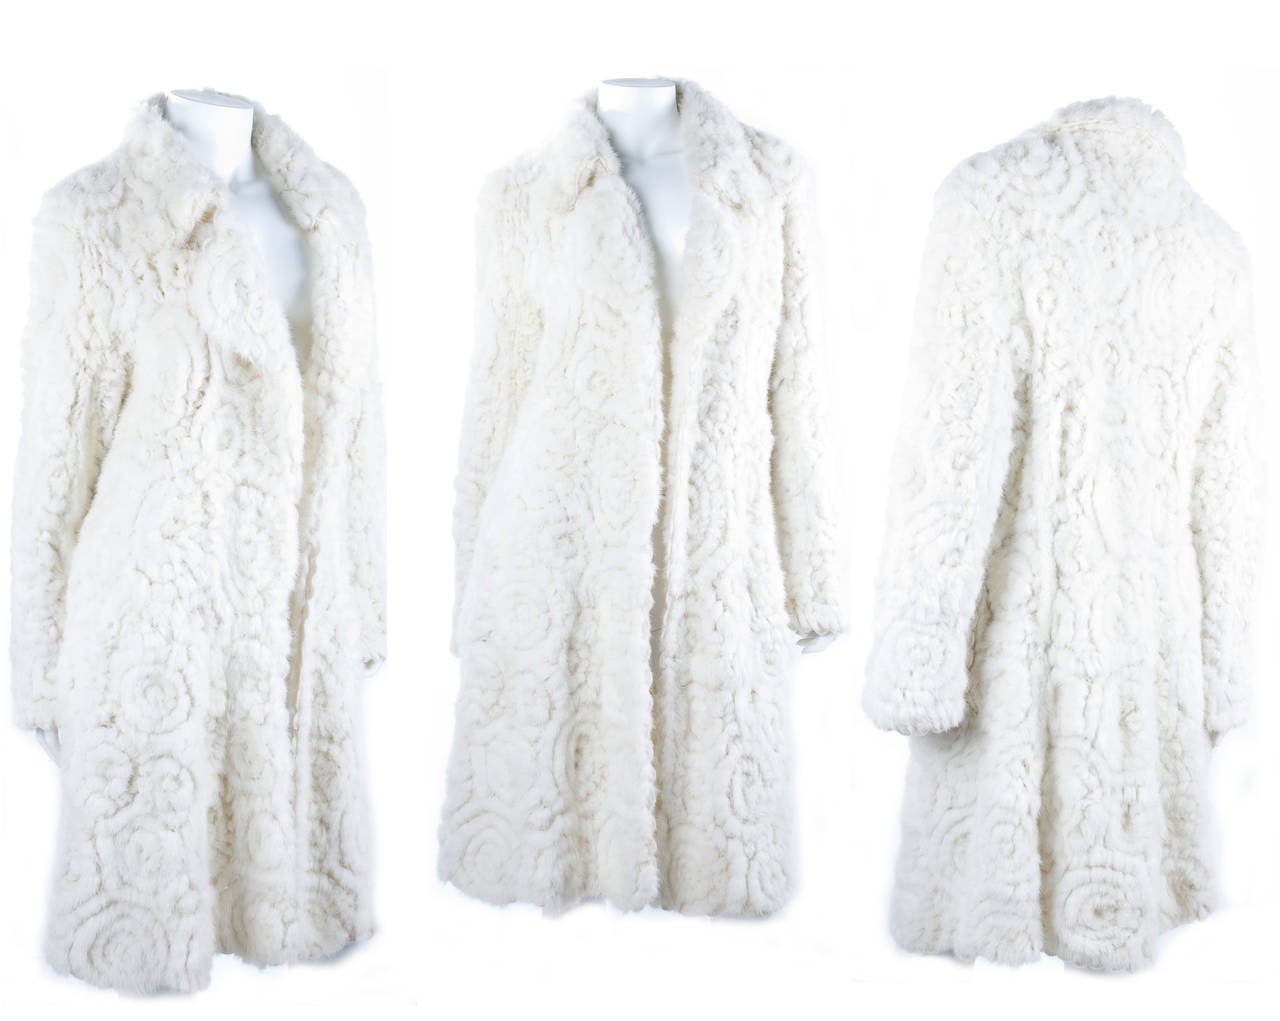 John Galliano White Mink Fur Coat.
The coat is crochet in cashmere and white mink.
Beautiful done and a featherweight.
Size 38 EU - 6 US
50% cashmere and 50% mink
Excellent condition.

Measurements:
Length 101.5 cm - 40